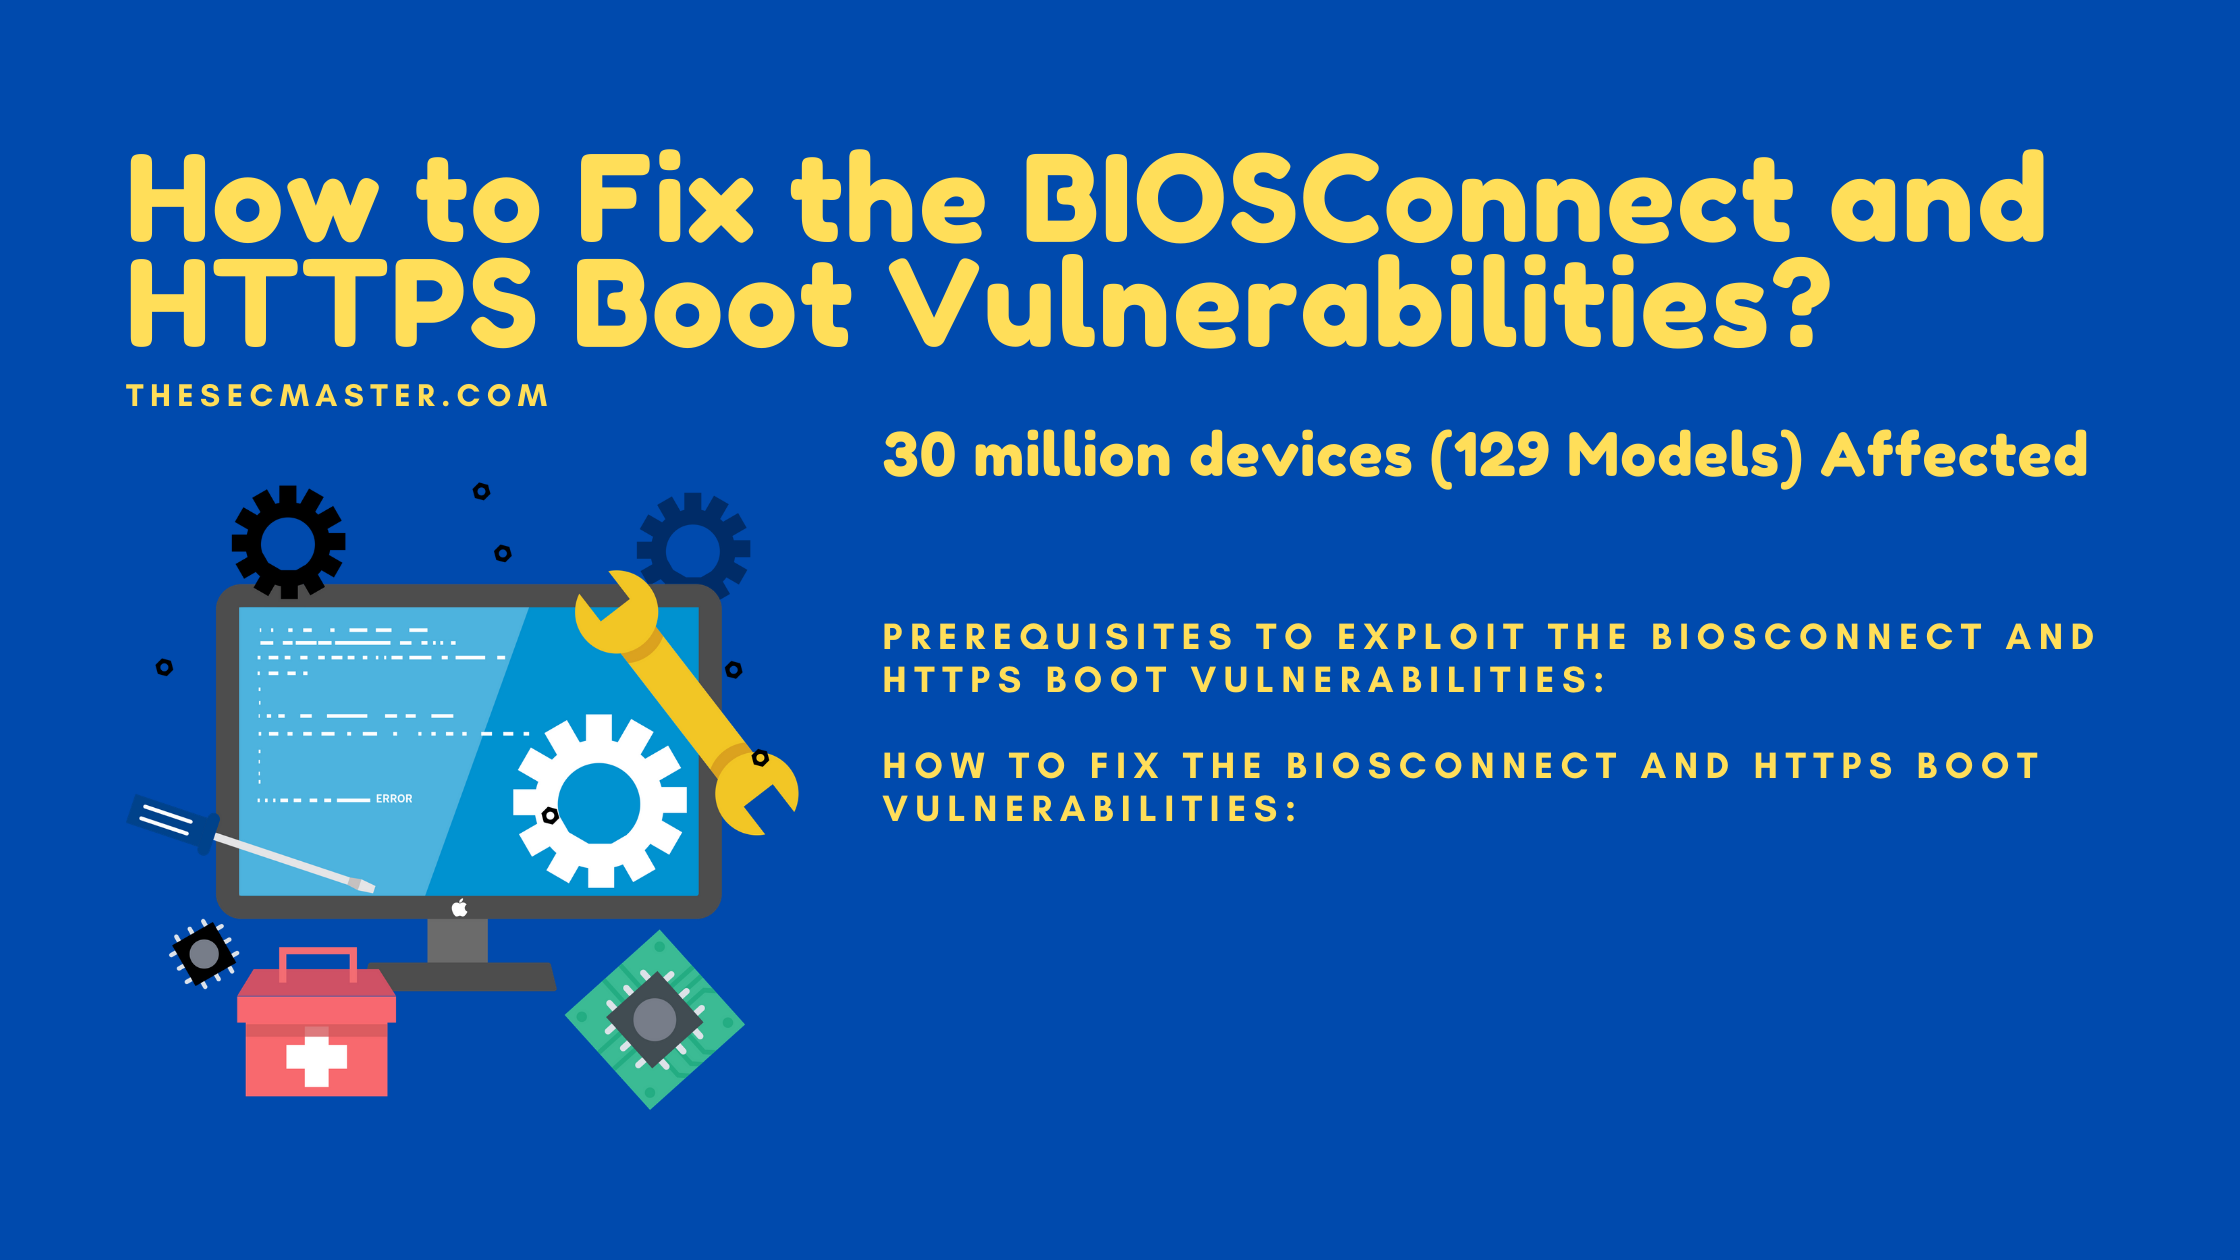 How To Fix The Biosconnect And Https Boot Vulnerabilities Found On 129 Dell Models 30 Million Devices